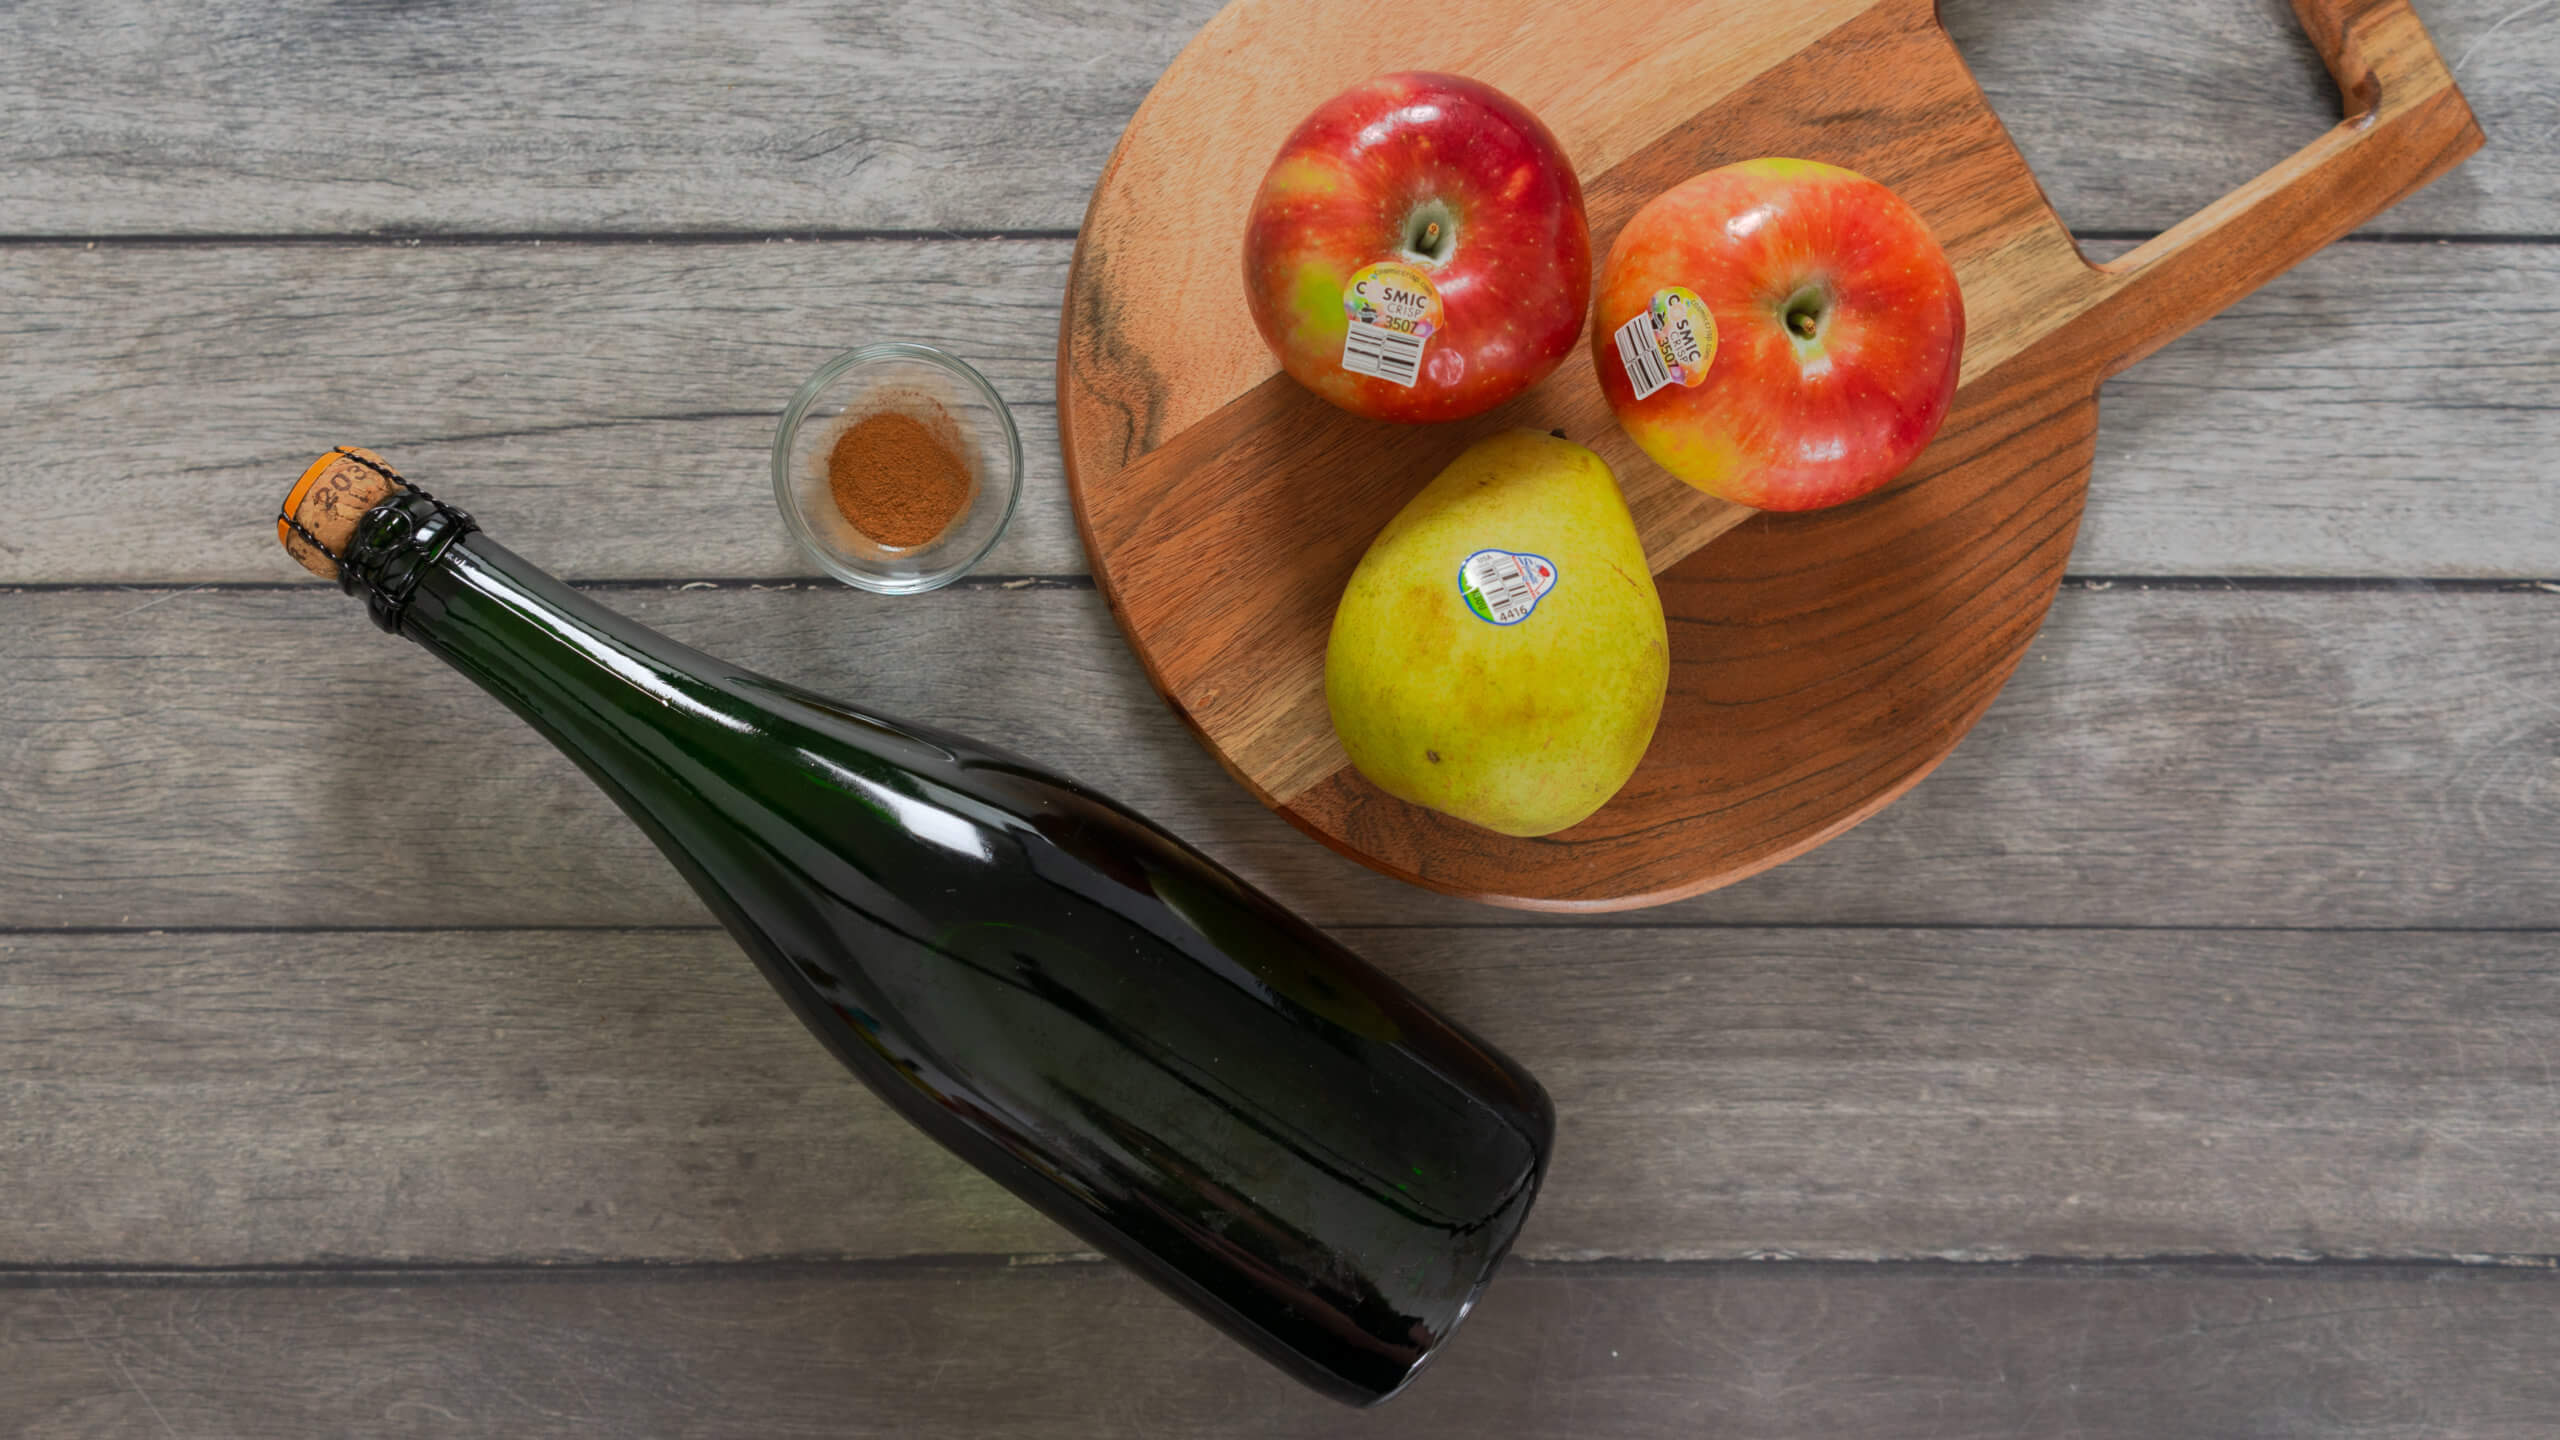 A bottle of champagne next to a cutting board with whole apples